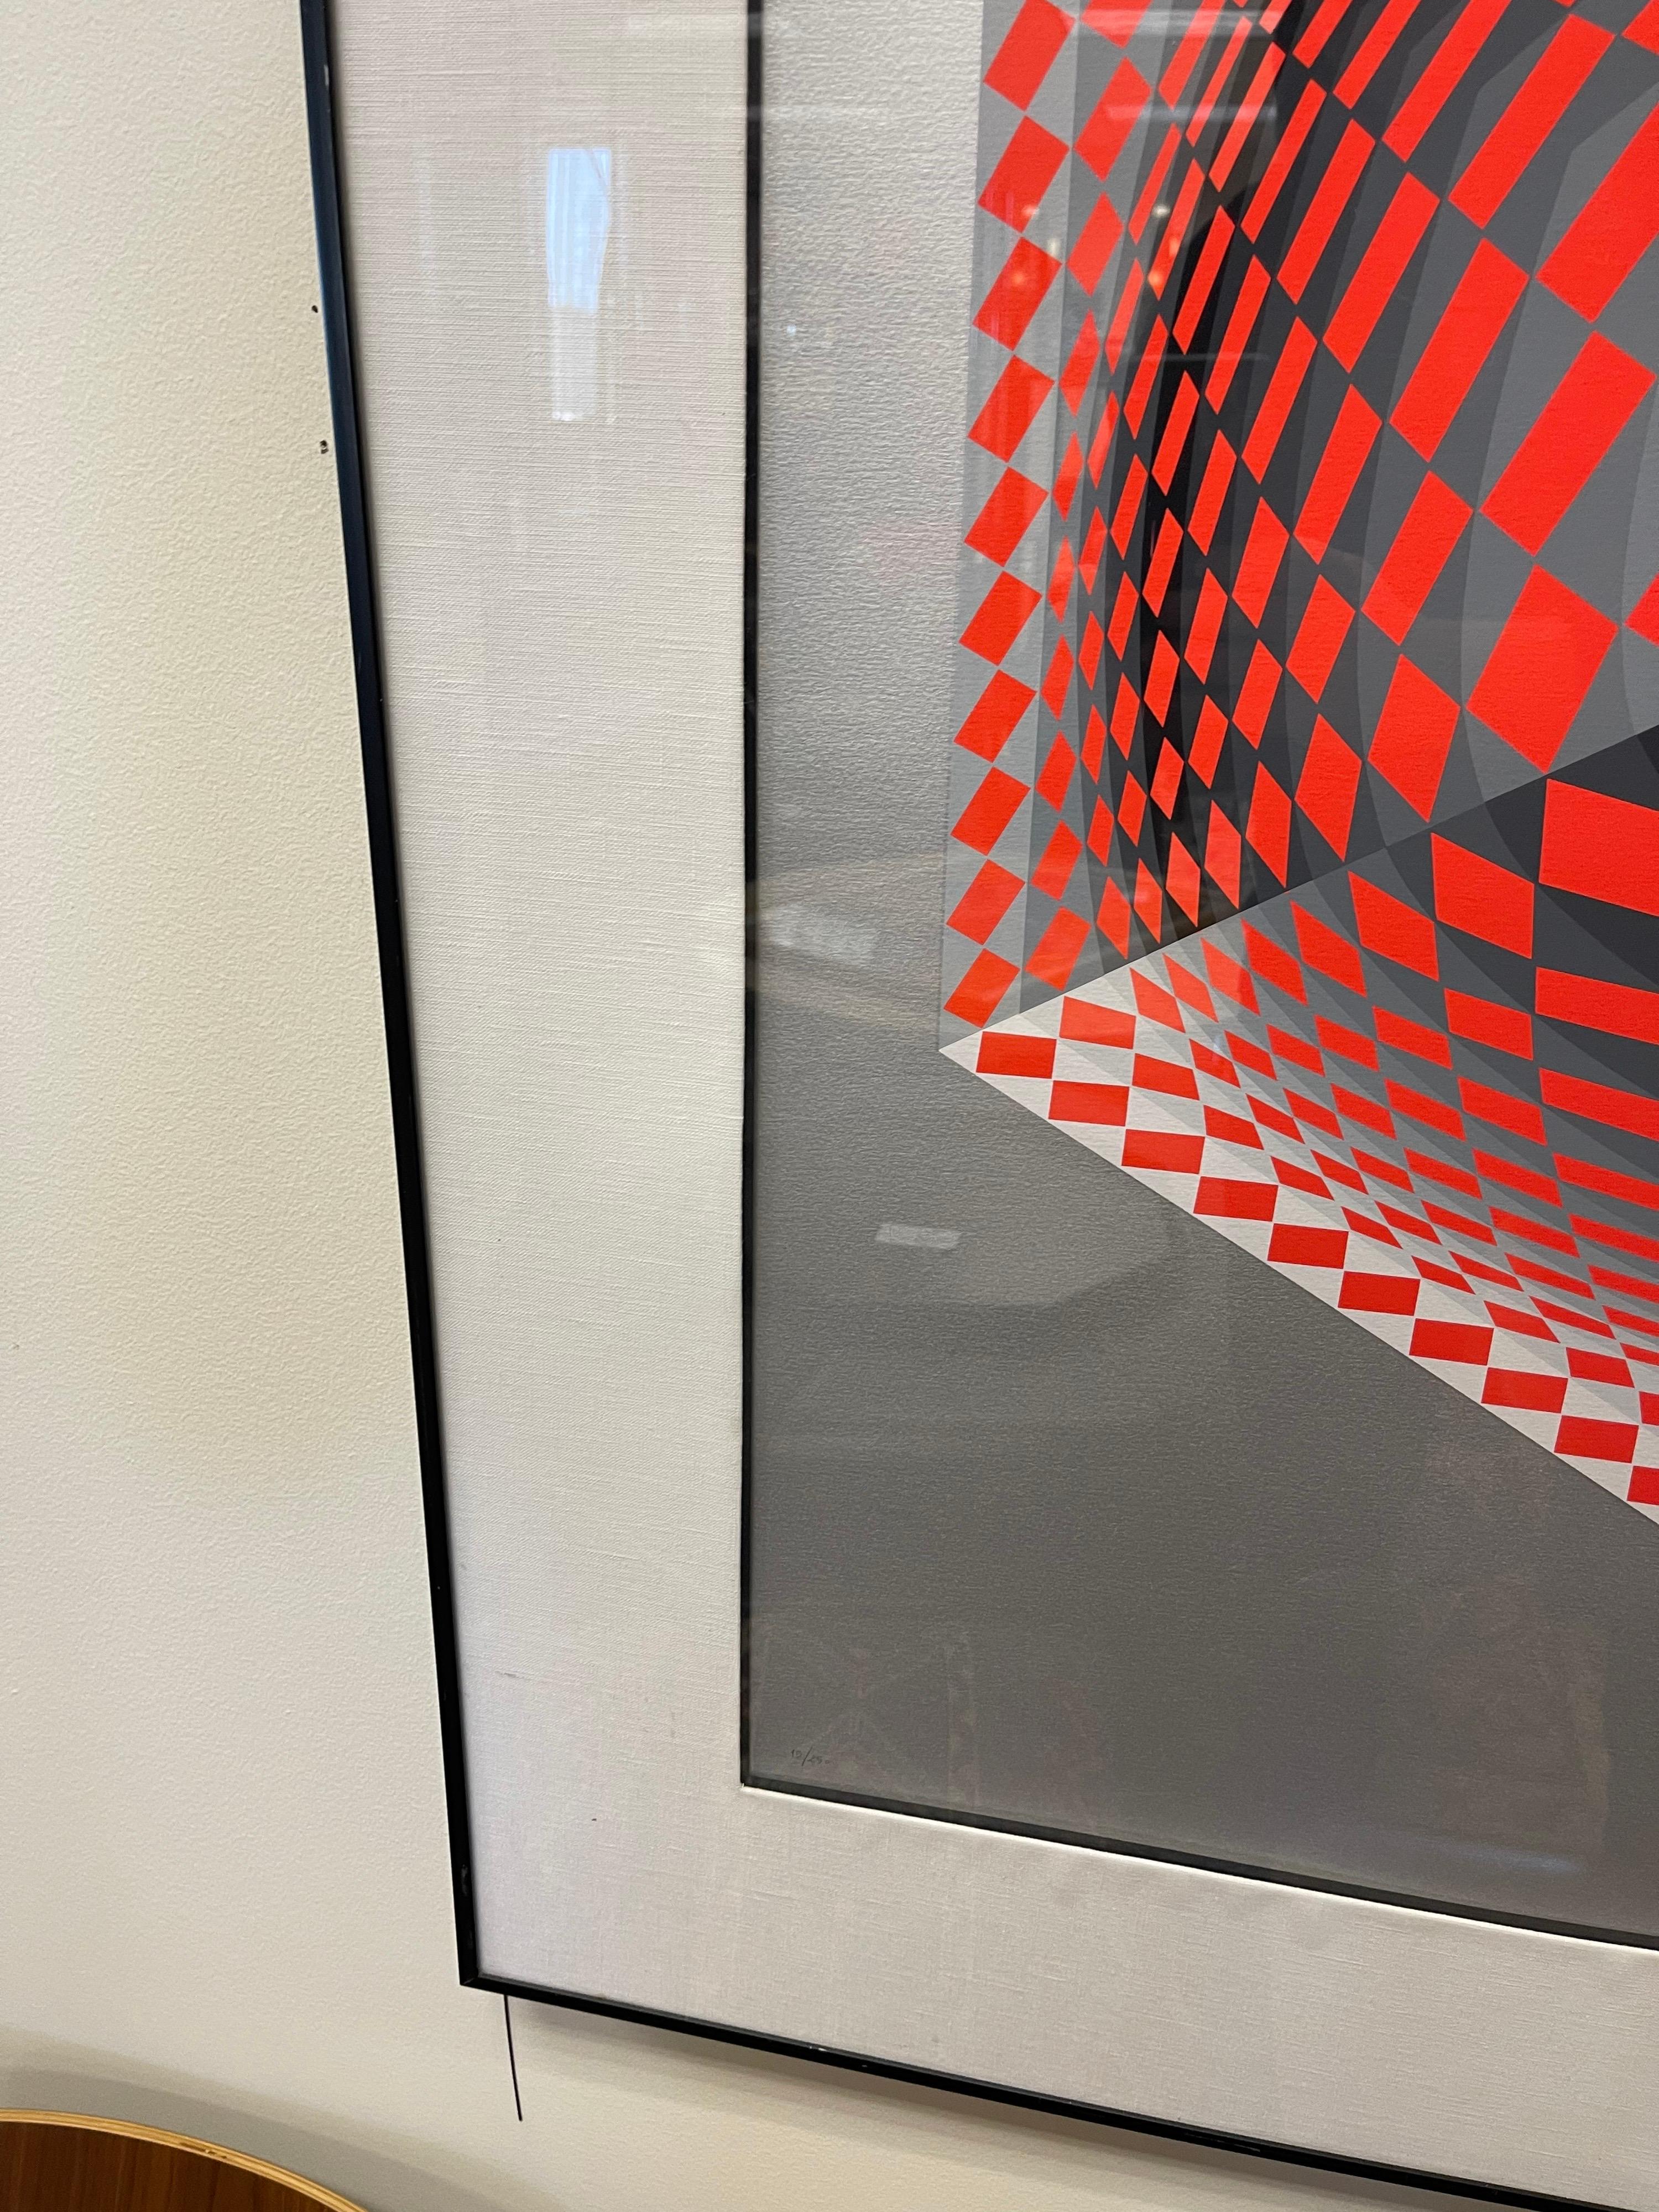 Chrome Victor Vasarely Signed and Numbered Limited Edition Serigraph Iconic Op Art 